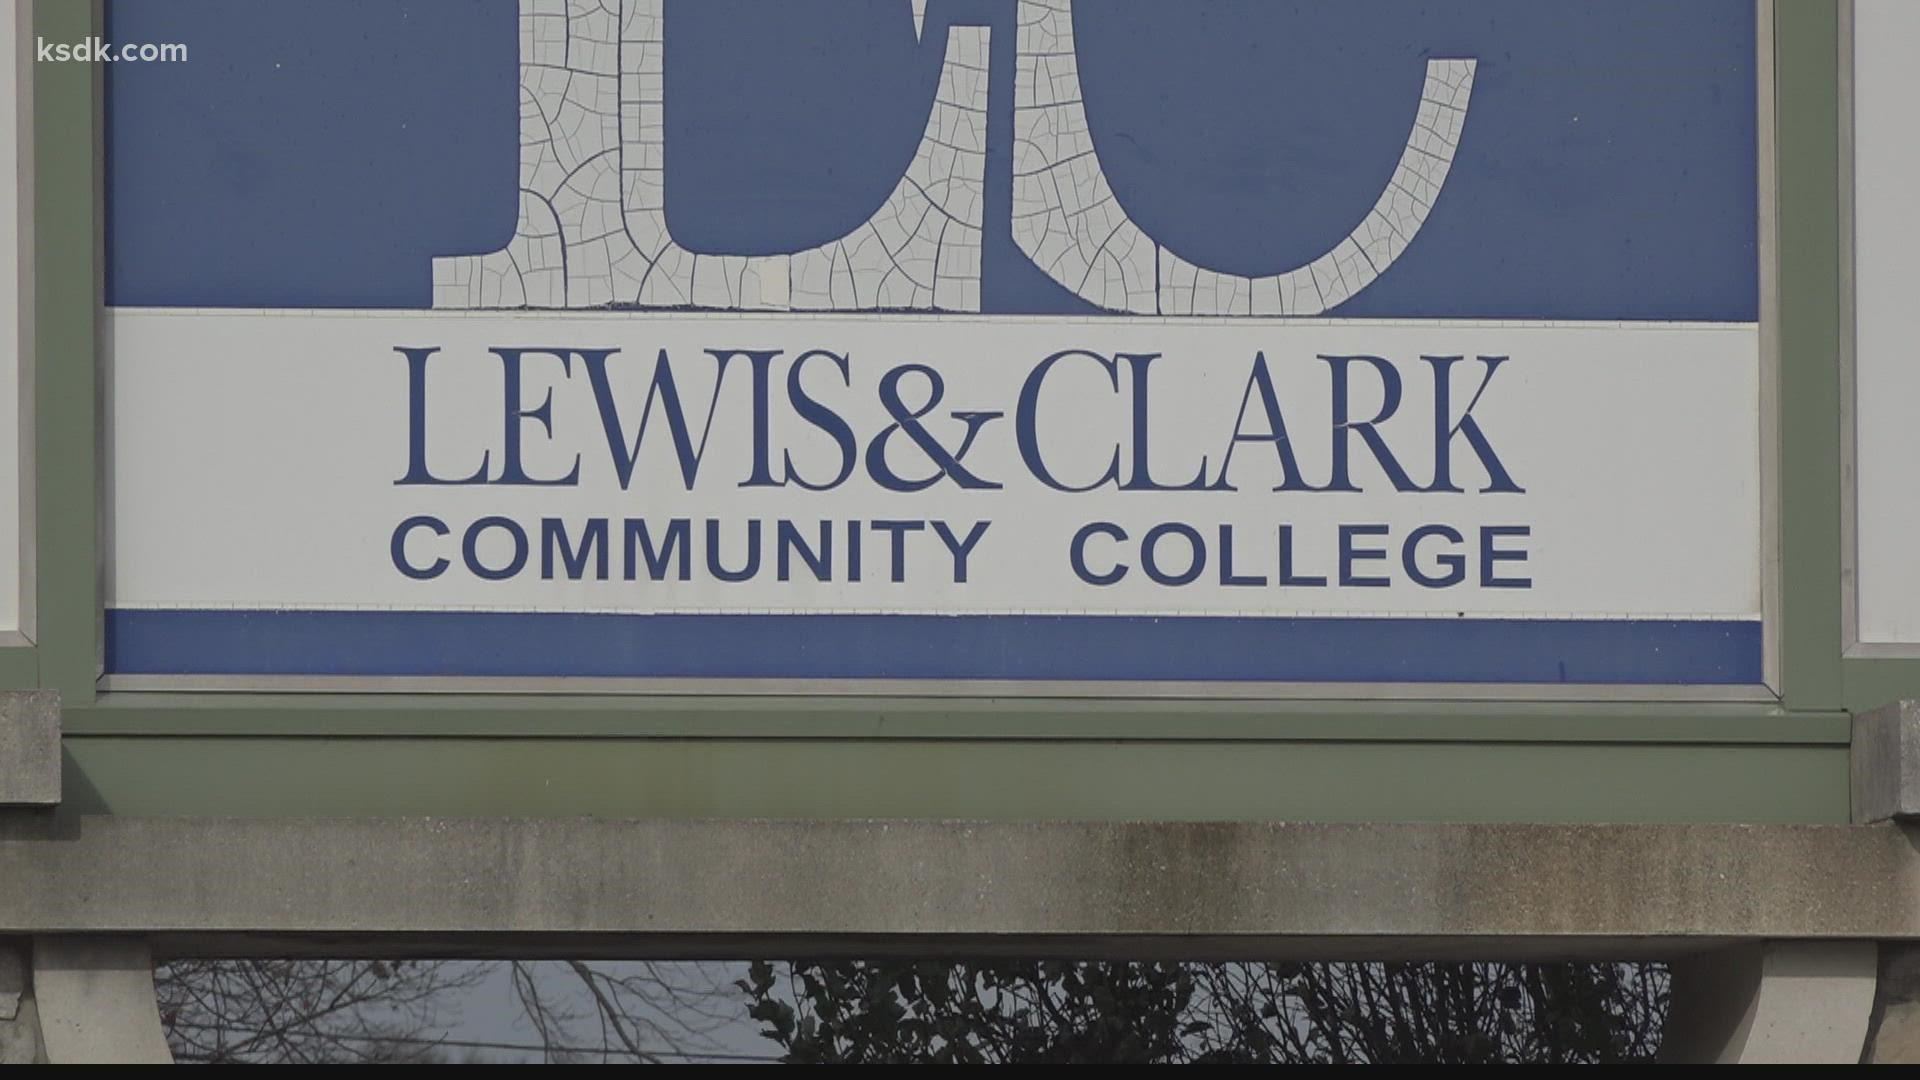 College leaders say the attack happened Tuesday night. Students and staff received system-wide texts Wednesday morning that campus was closed.